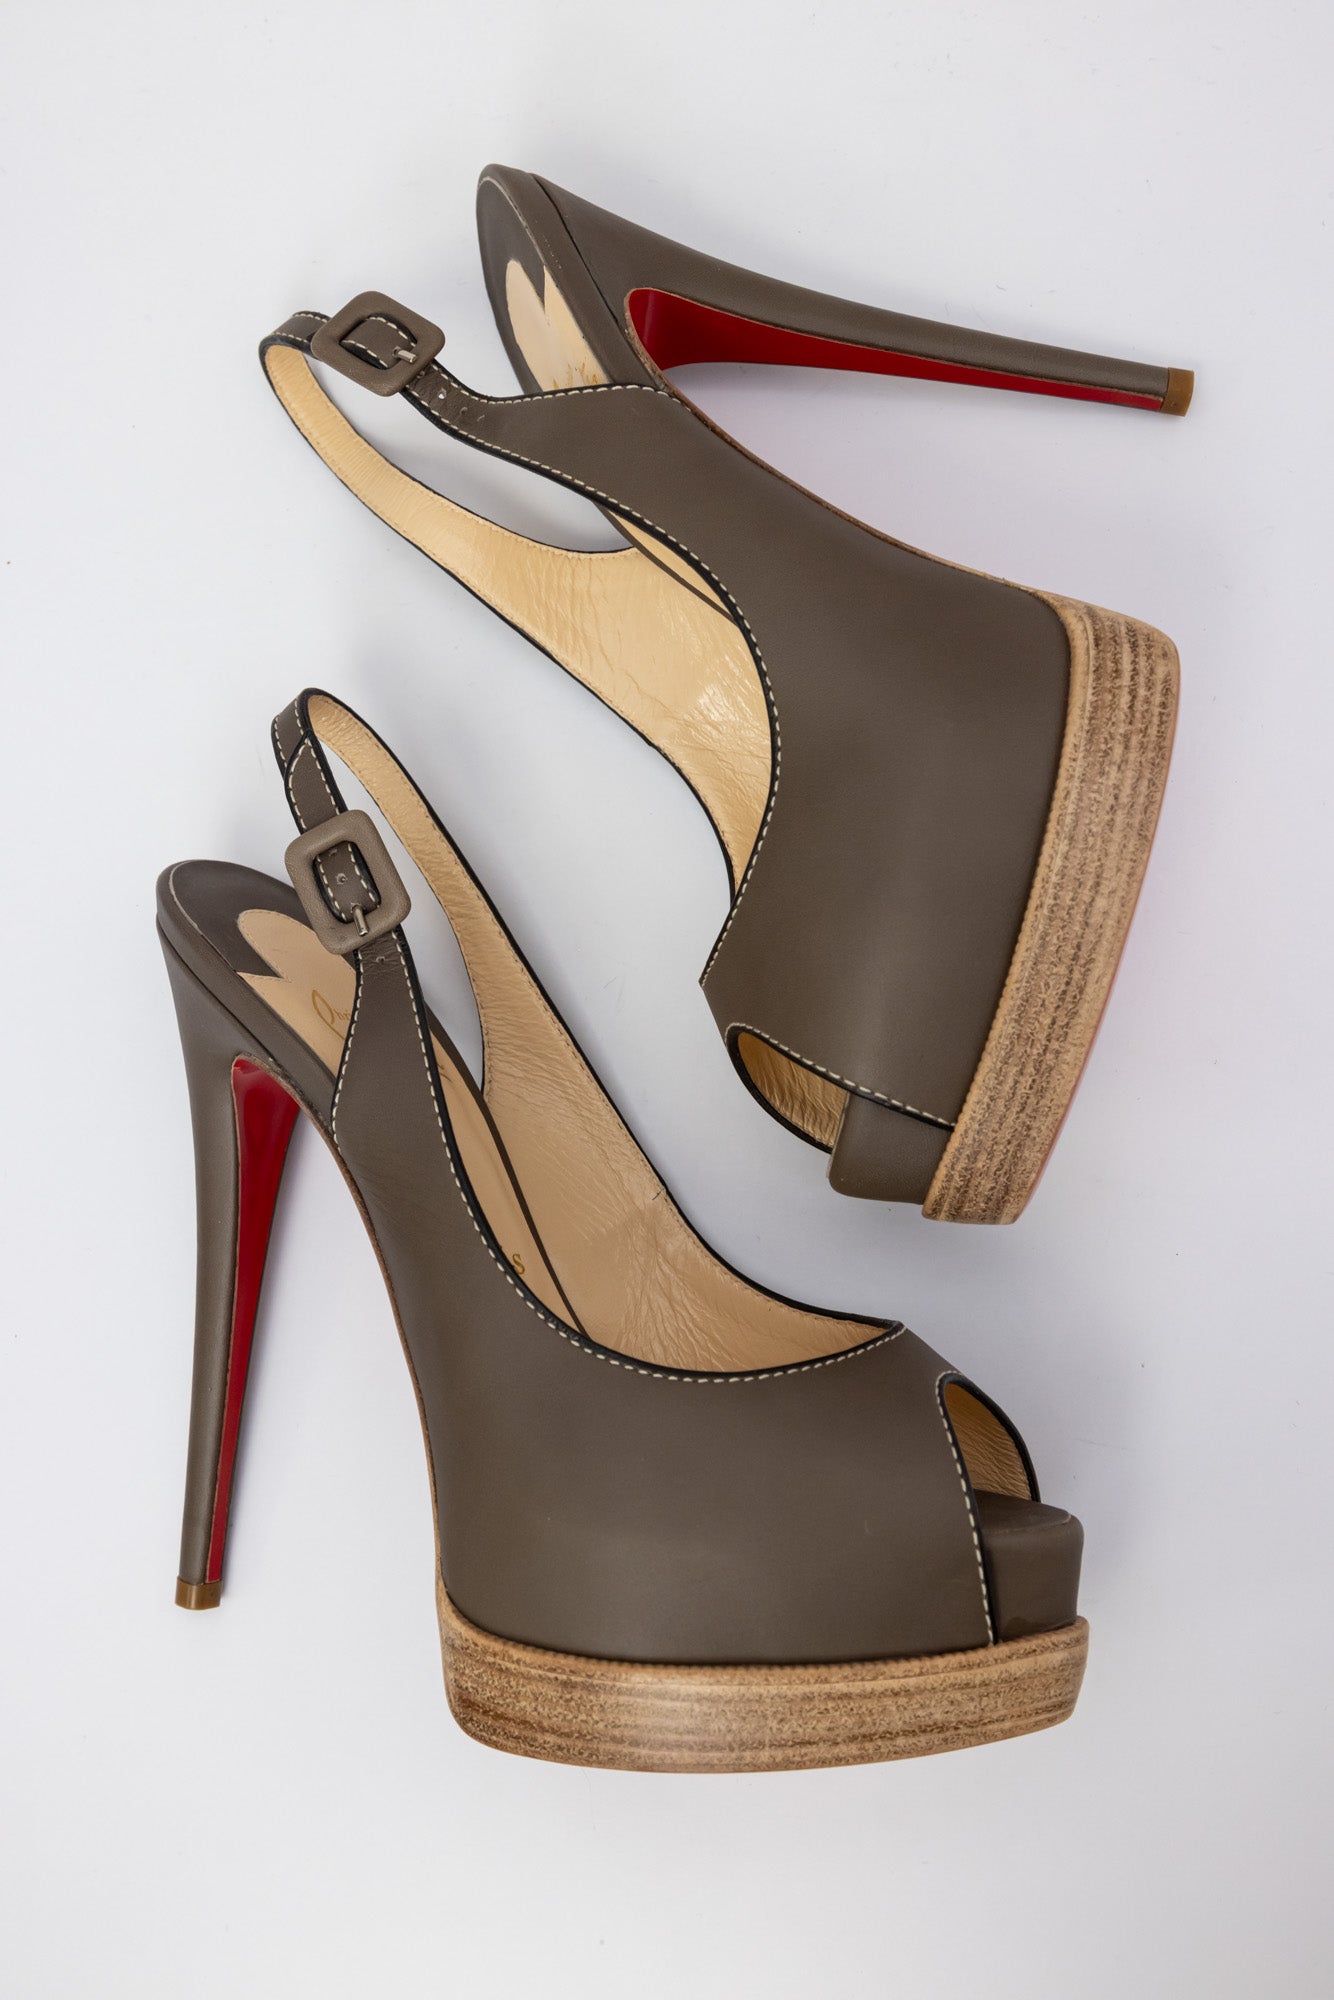 CHRISTIAN LOUBOUTIN Dark Grey Leather Sling-back Open Toe Platforms | Size IT 37.5 | Excellent Condition, Never Worn | Made in Italy